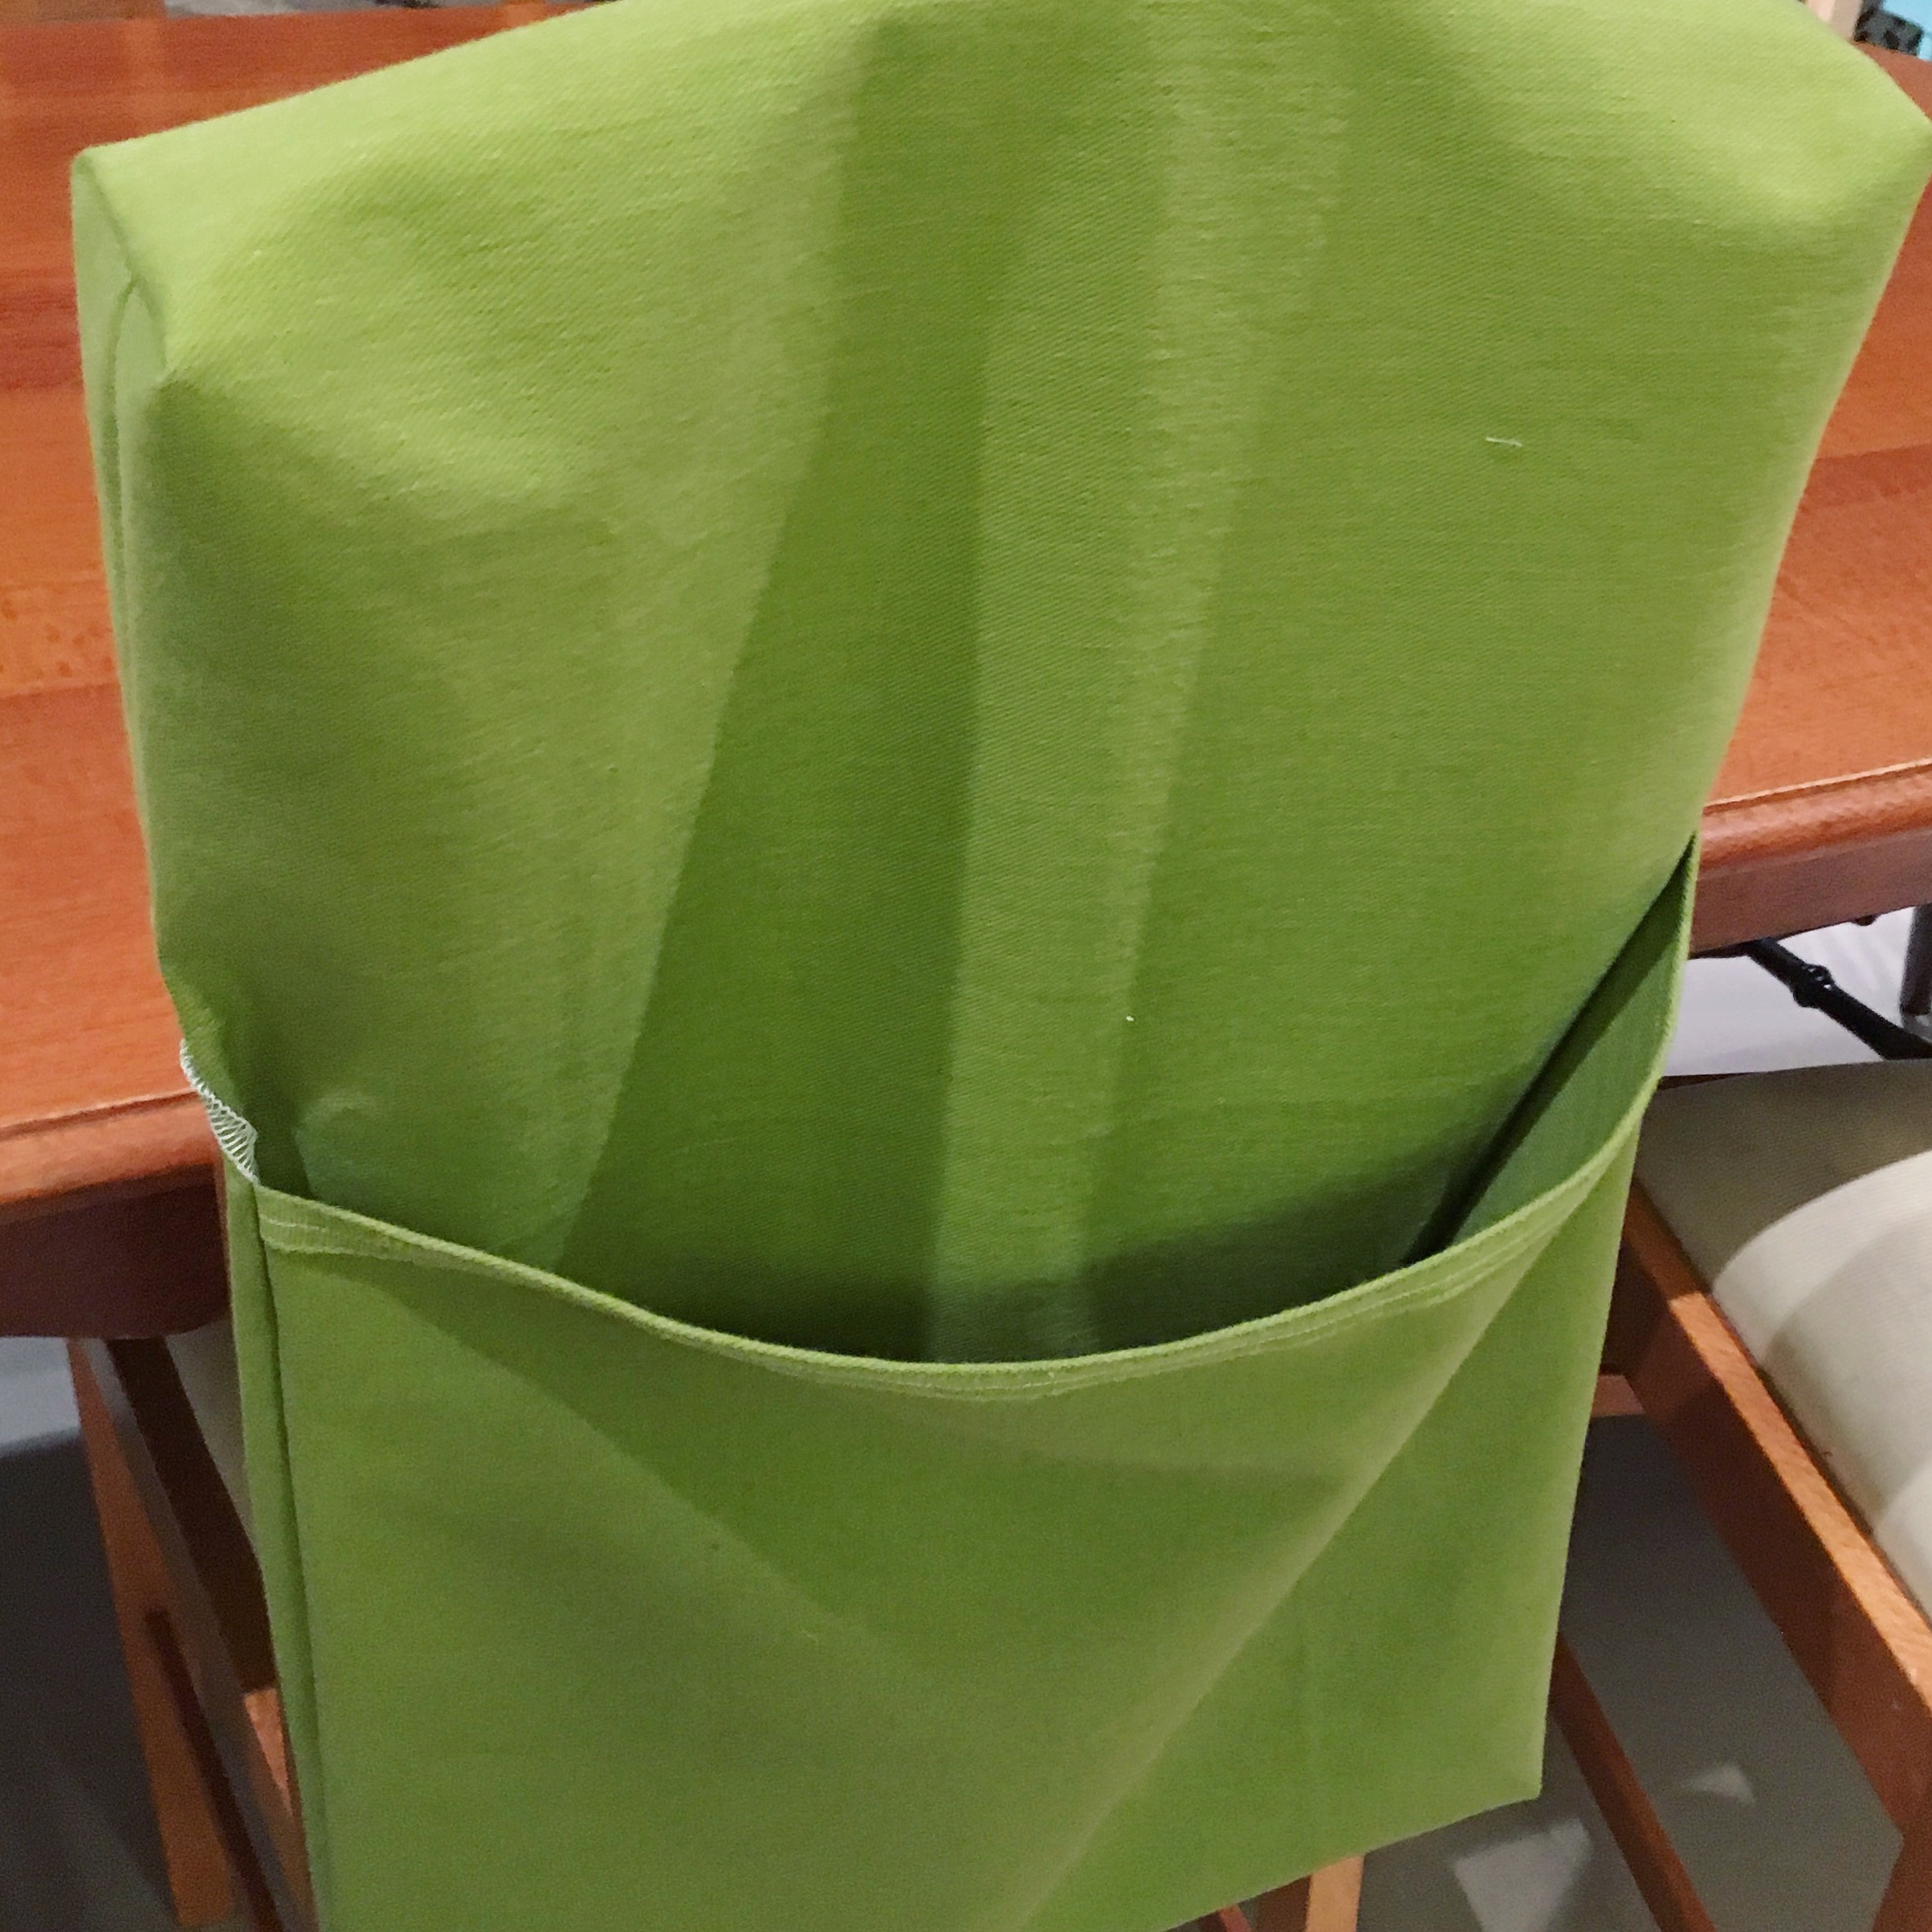 How to Sew a Chair Bag